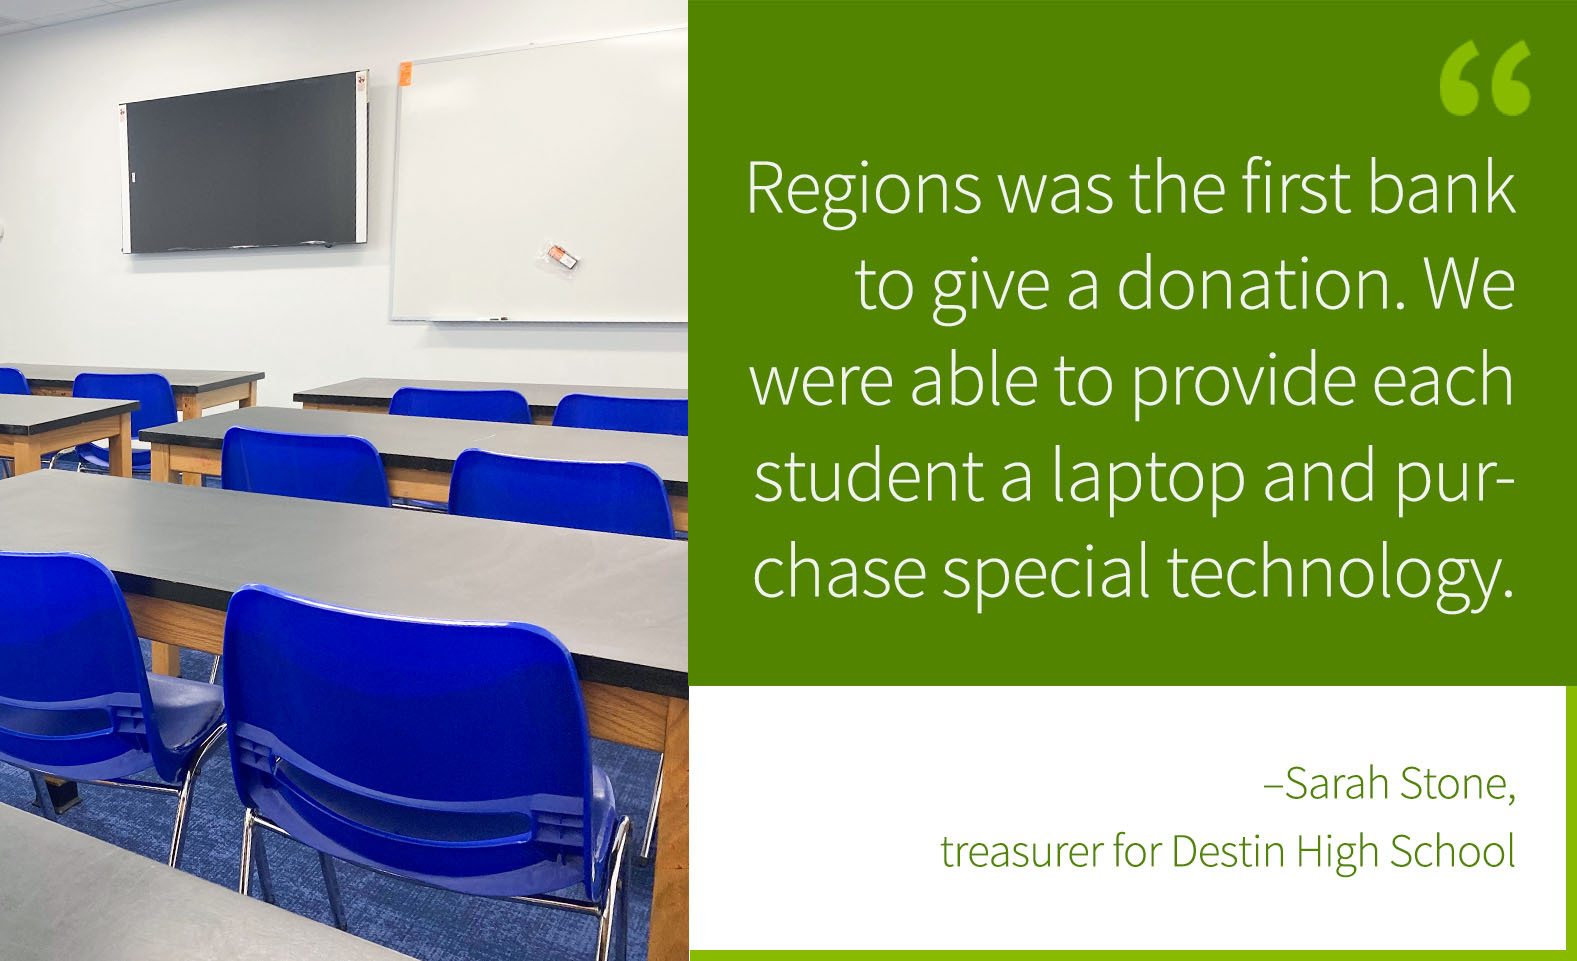 photo of classroom, with quote from Sarah Stone that says, "Regions was the first bank to give a donation. We were able to provide each student a laptop and purchase special technology."